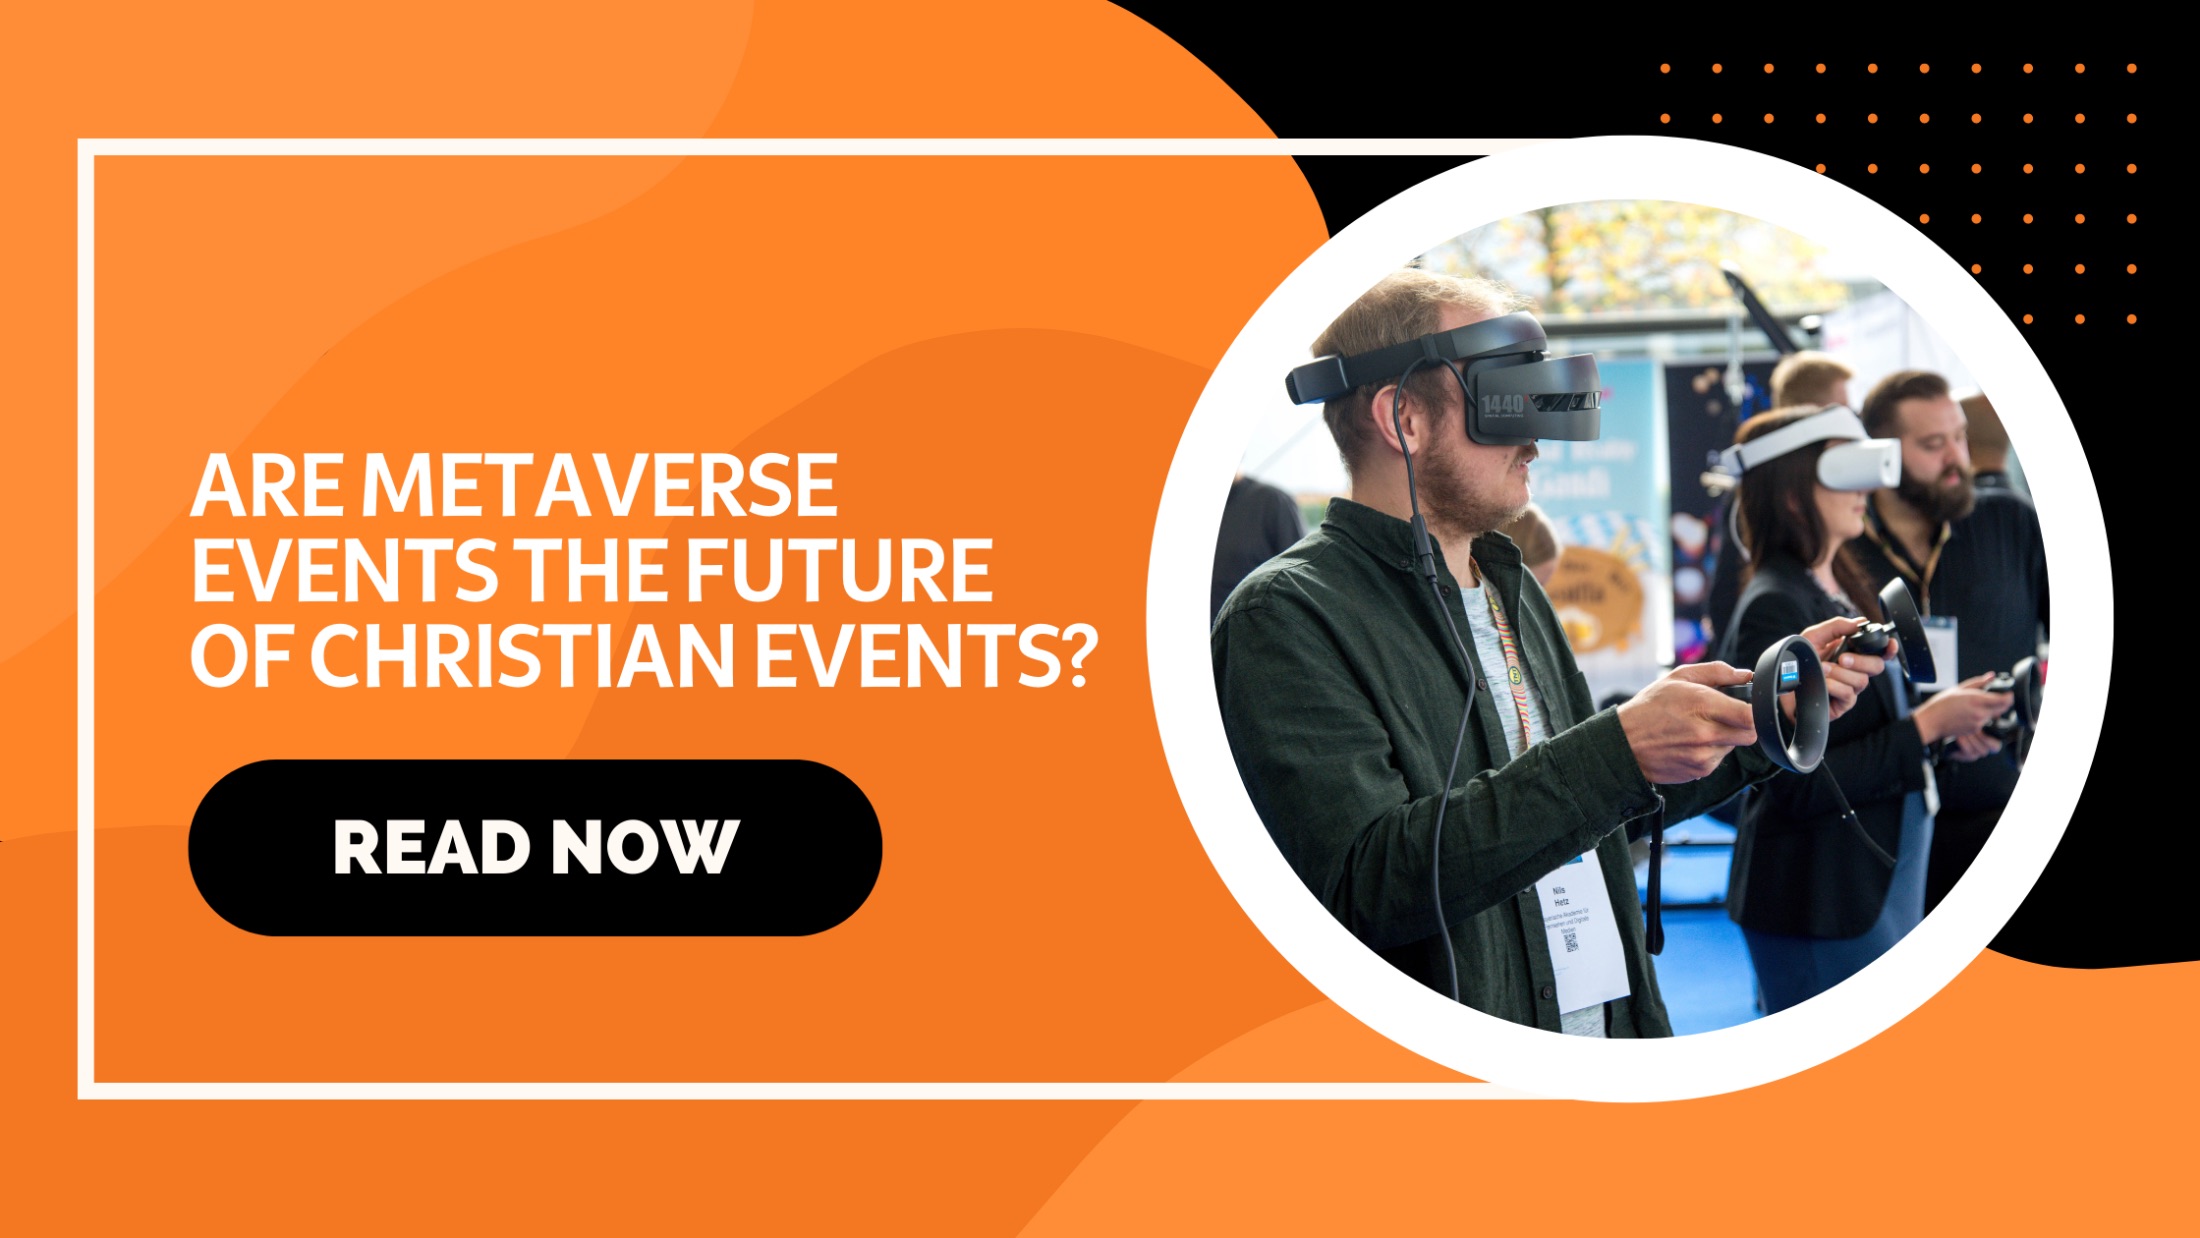 You are currently viewing ARE METAVERSE EVENTS THE FUTURE OF CHRISTIAN EVENTS? WE COMPARED THE PROS AND CONS OF HOSTING A METAVERSE VIRTUAL EVENT